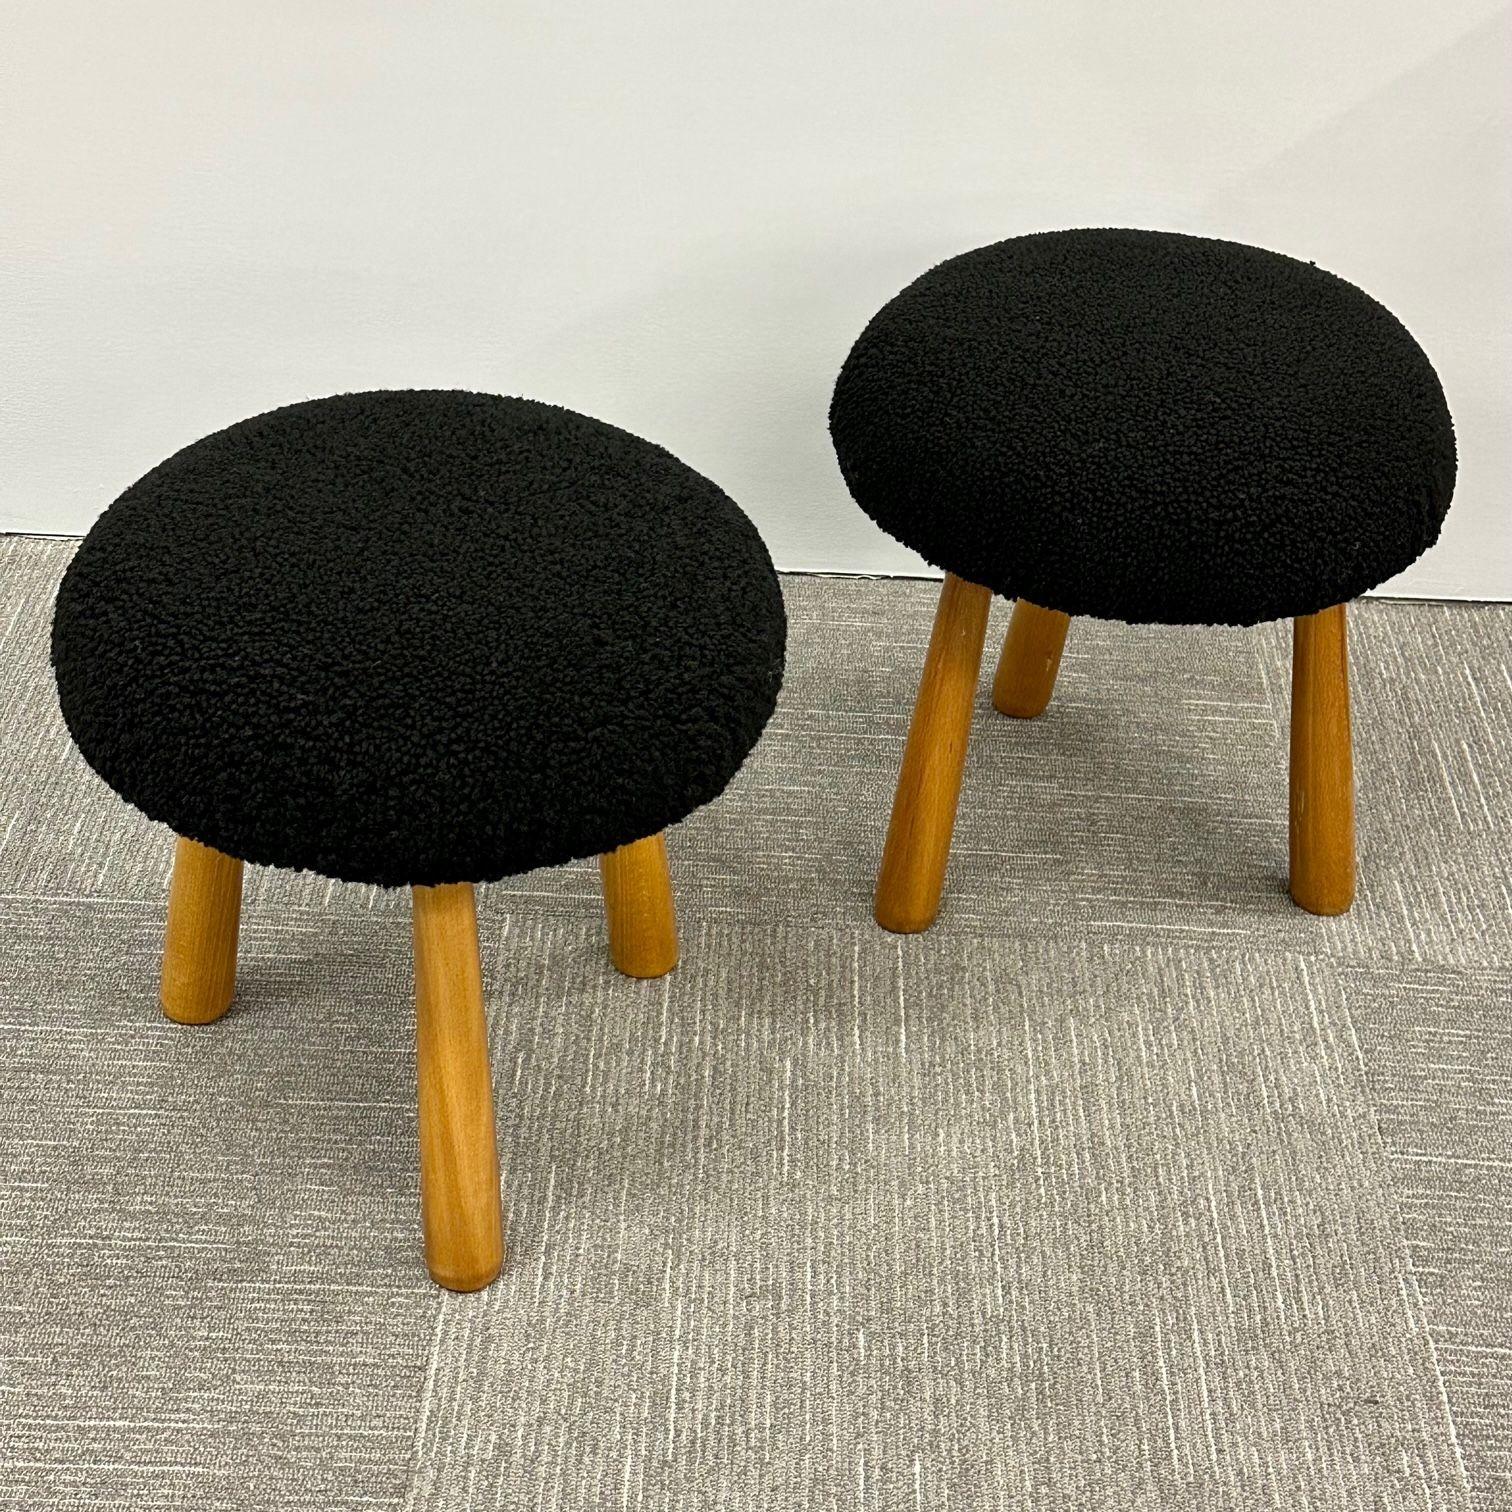 Pair Contemporary Swedish Modern Style Sheepskin Foot-Stools / Ottomans
 
Contemporary organic form tri-pod stools or ottomans. New comfortable foam cushioning and black dyed genuine shearling. Overall form and design inspired by Nordic design /